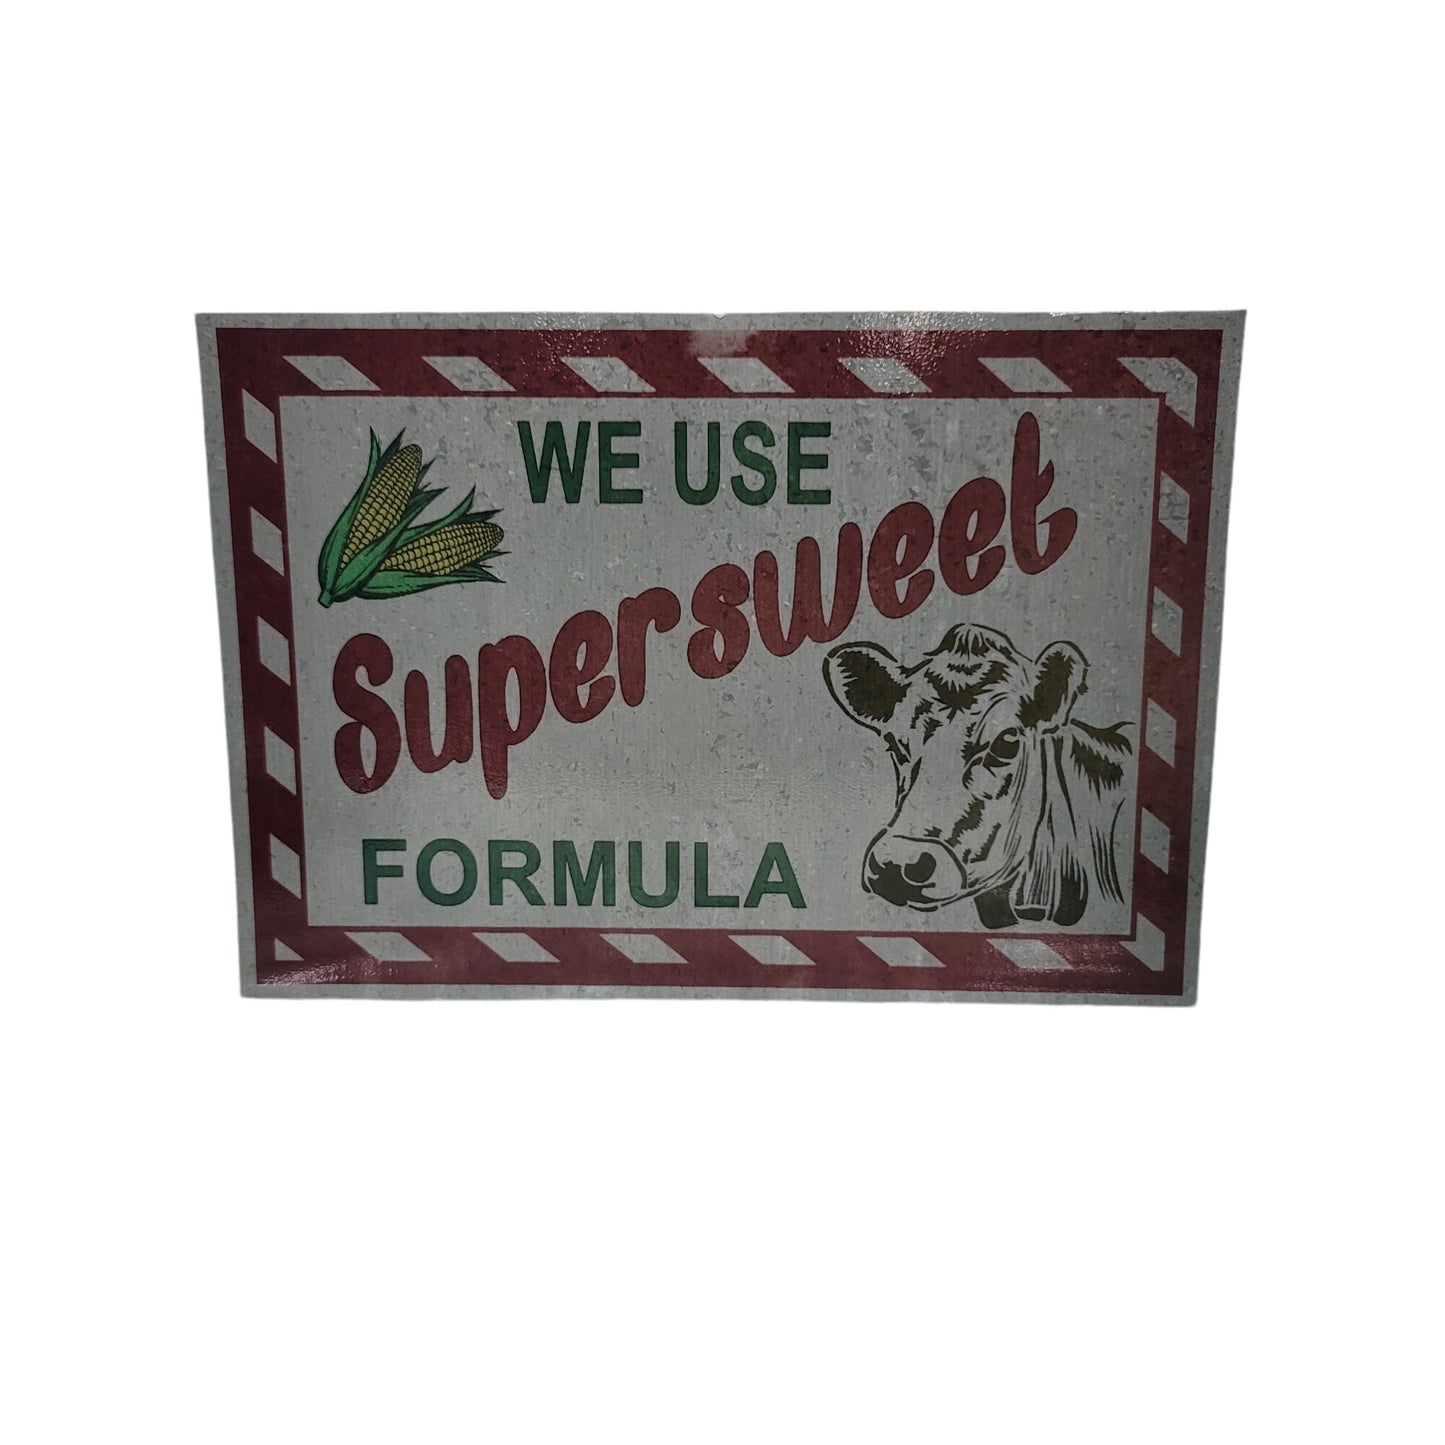 supersweet feeds sign tin farm feed store sign